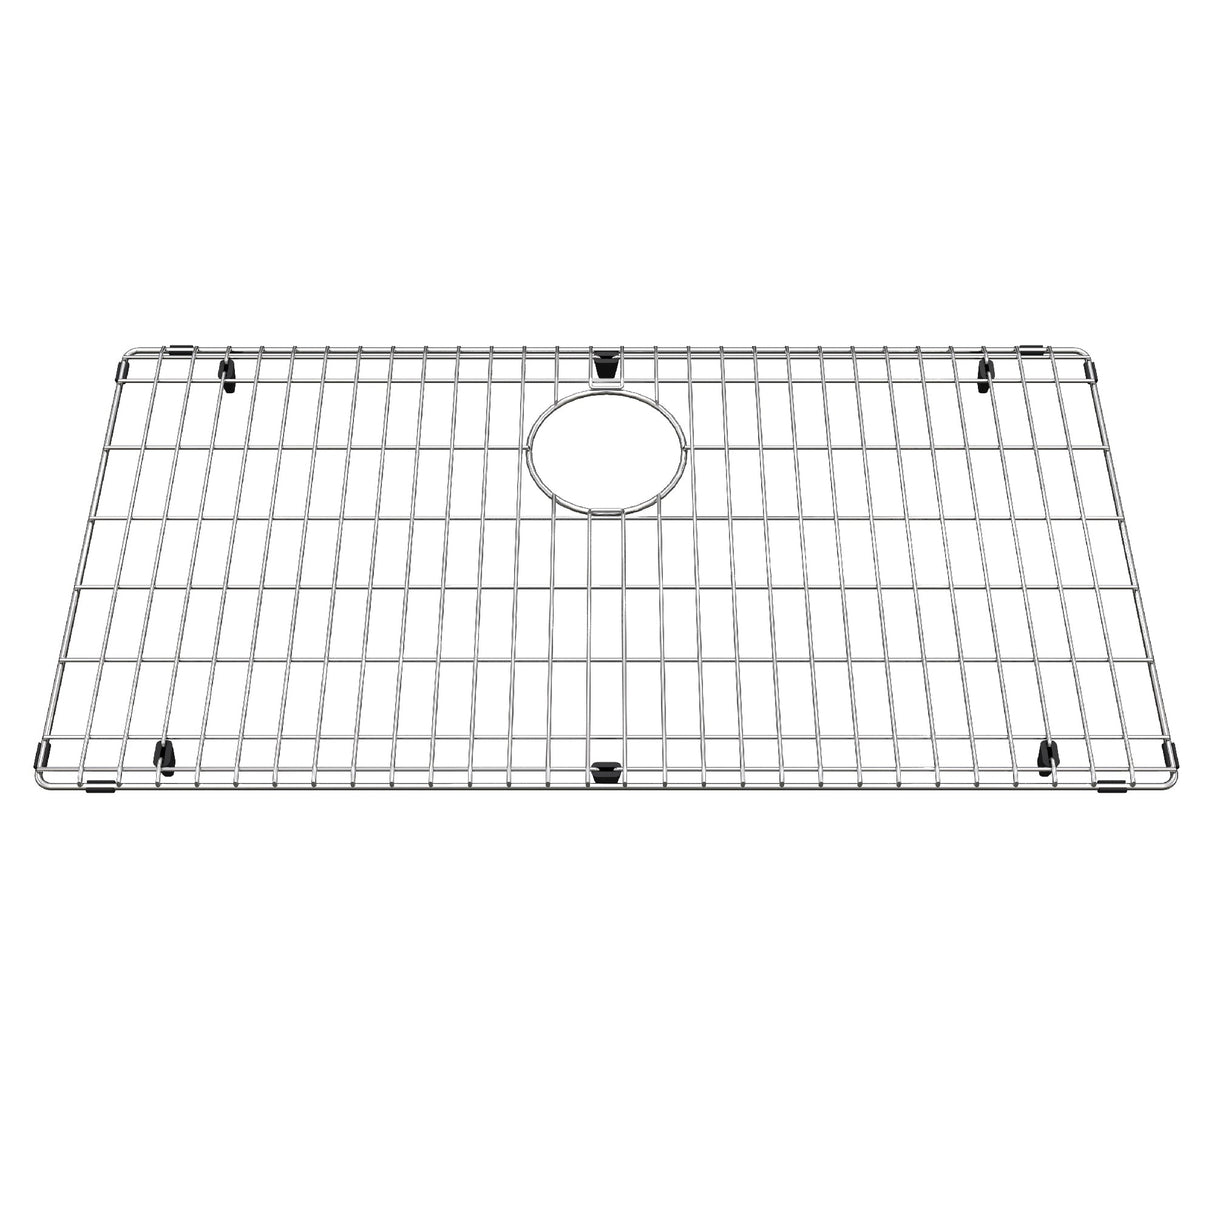 KINDRED BG531S Stainless Steel Bottom Grid for Sink 15-in x 29.5-in In Stainless Steel